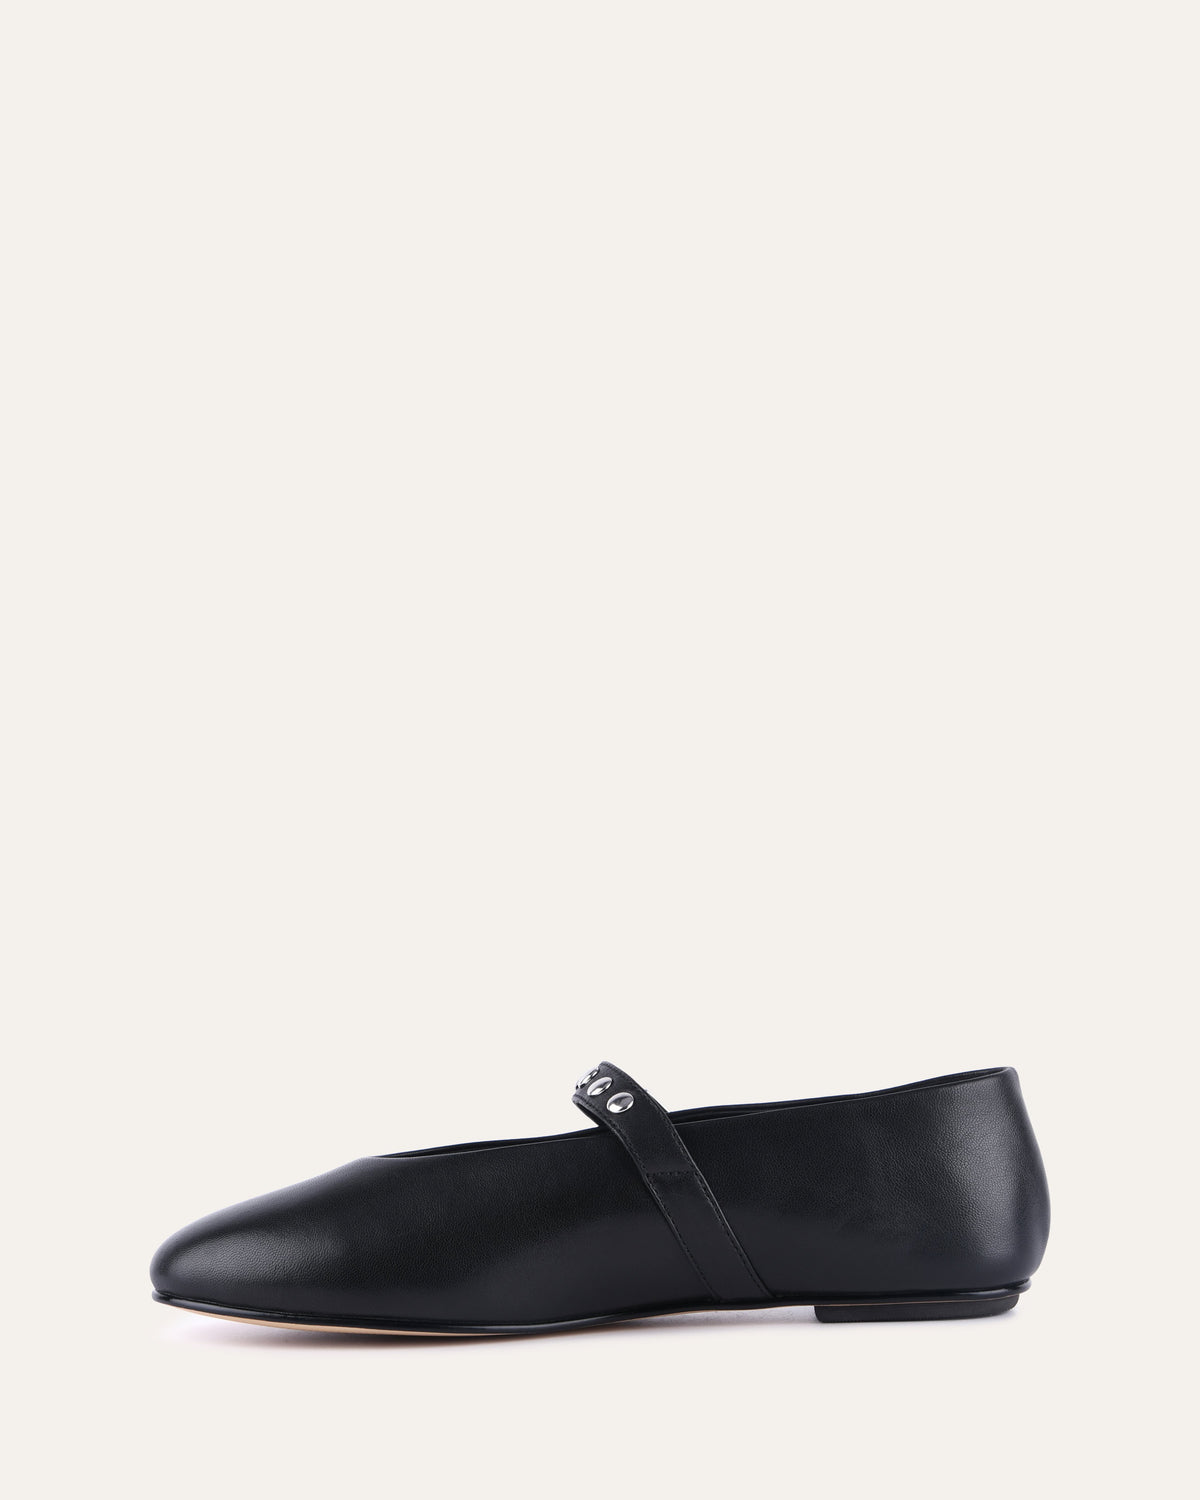 GISELLE CASUAL FLATS BLACK LEATHER